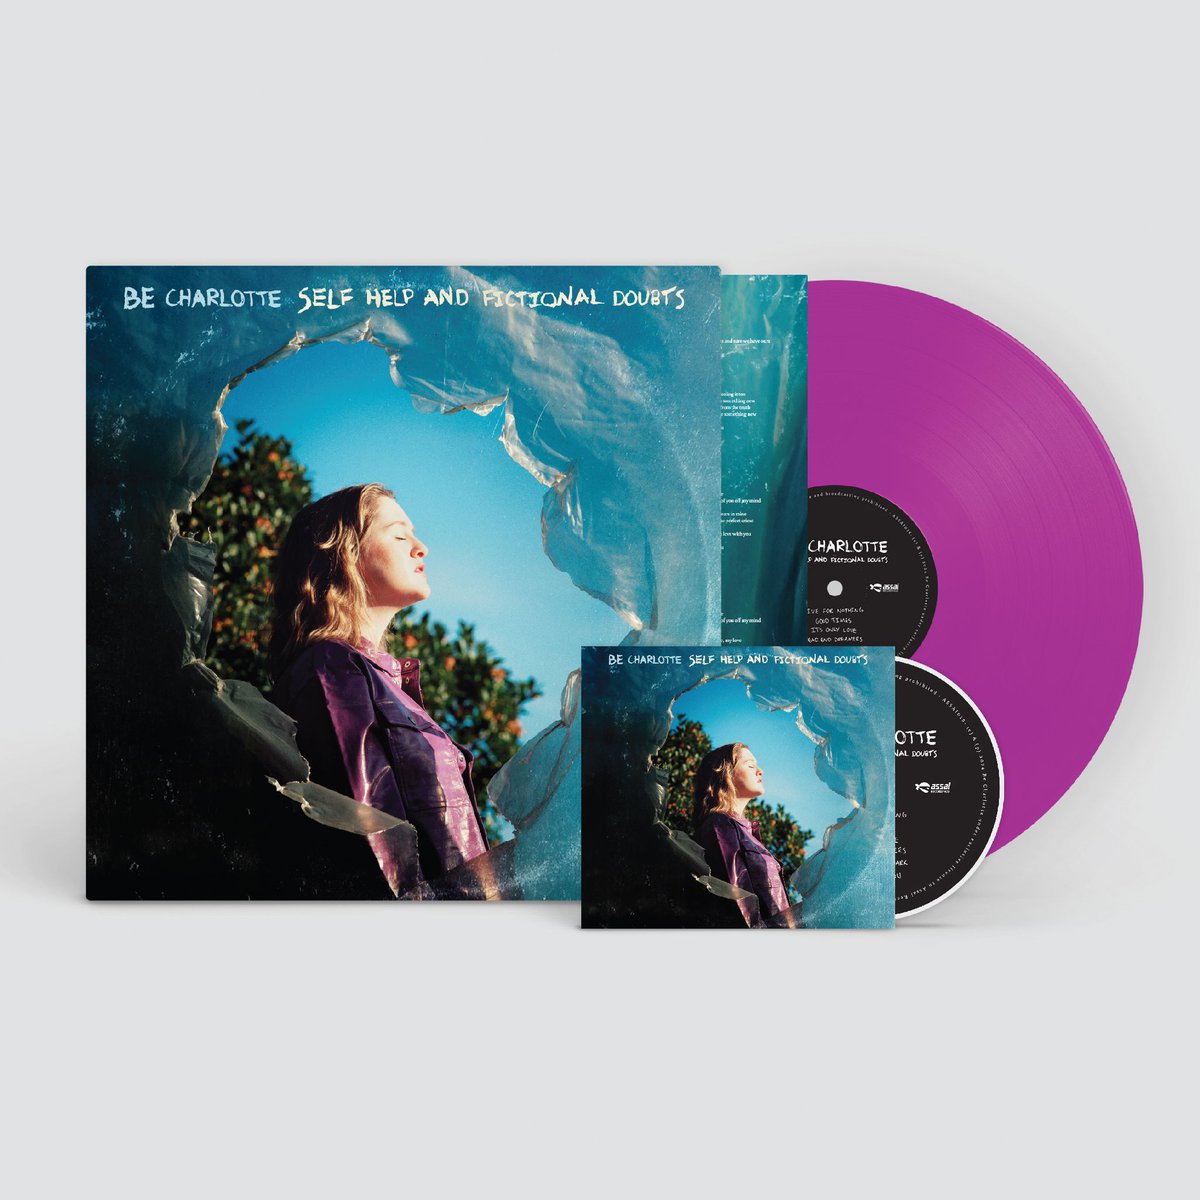 * BE CHARLOTTE ALBUM ANNOUNCED! * Yaaaaaaaaaas! 💜 'Self Help And Fictional Doubts' is out on June 21st, with the vinyl and CD releases through our own Assai Recordings! Pressed at @SeabassVinyl On Transparent Violet vinyl! Pre-Order: assai.co.uk/collections/be… #BeCharlotte